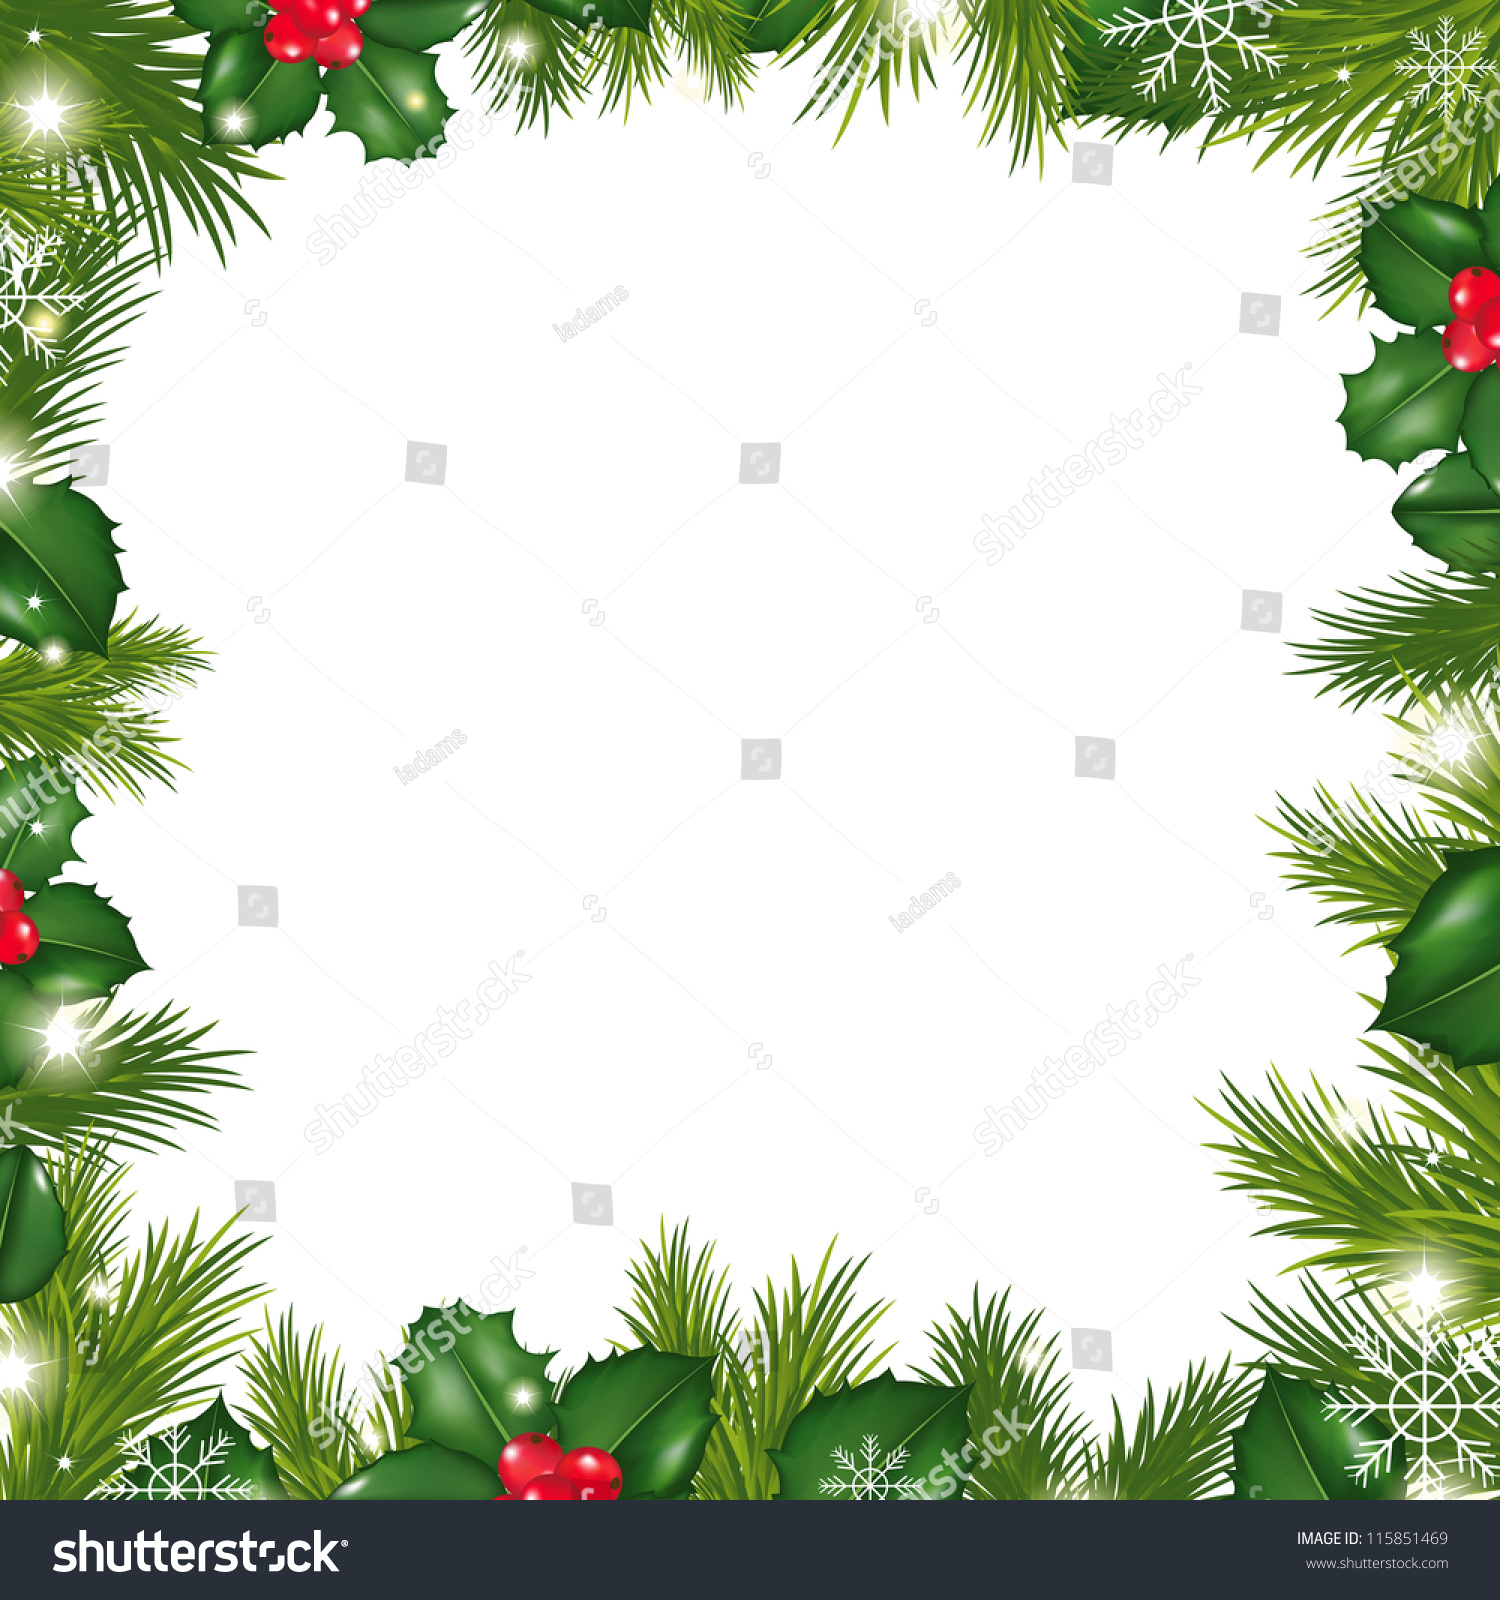 Borders With Snowflakes And Holly Berry Stock Photo 115851469 ...